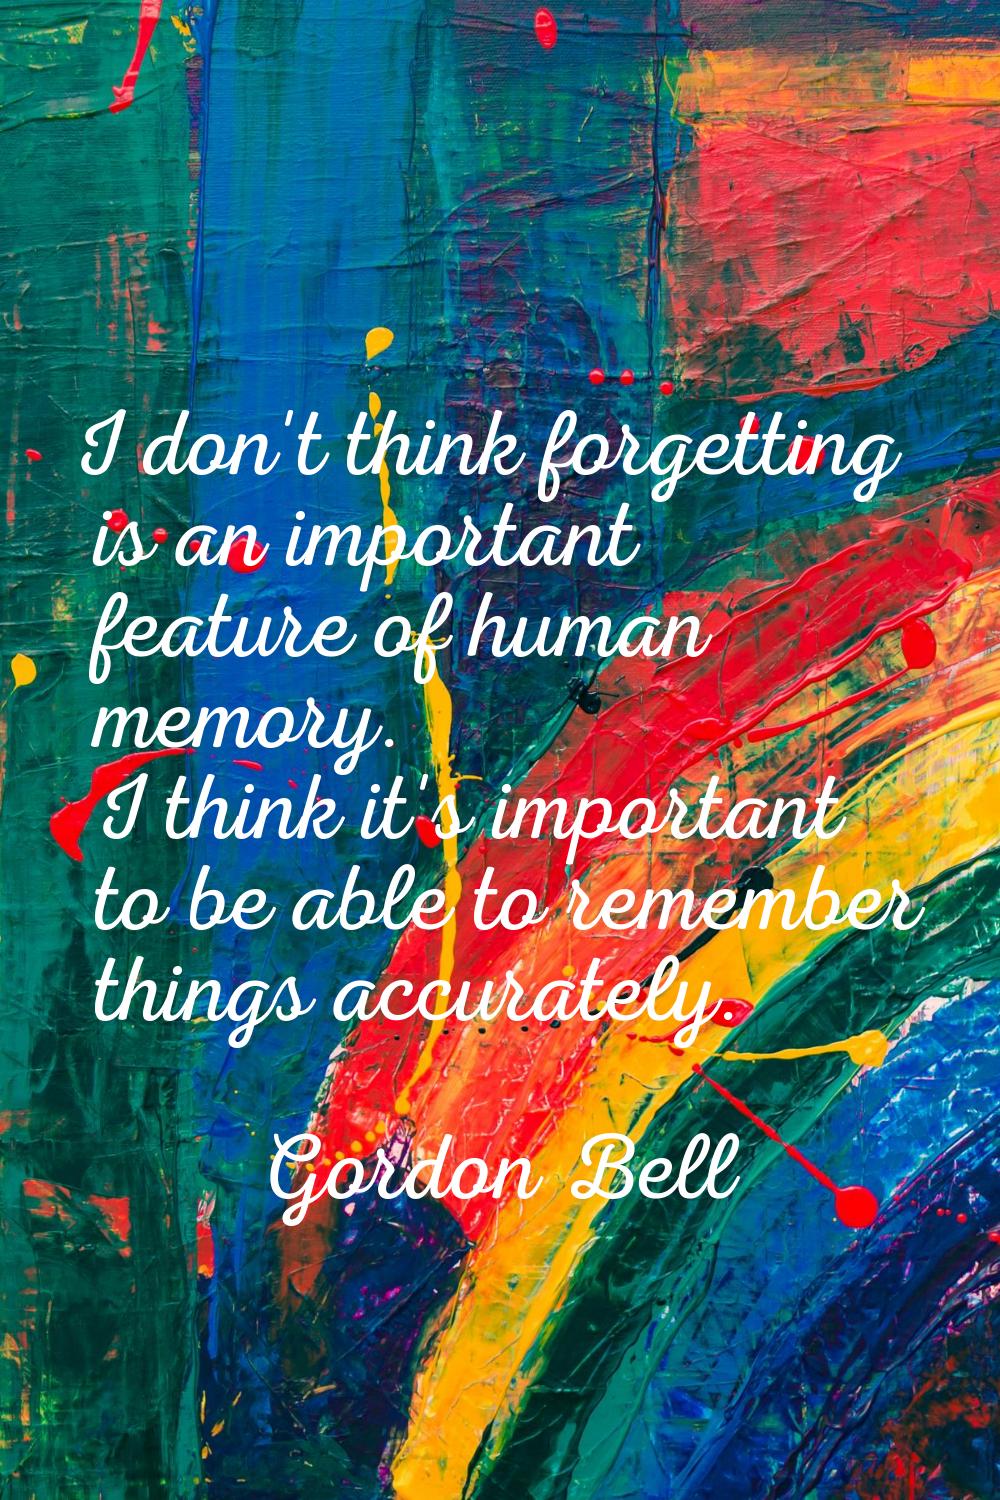 I don't think forgetting is an important feature of human memory. I think it's important to be able